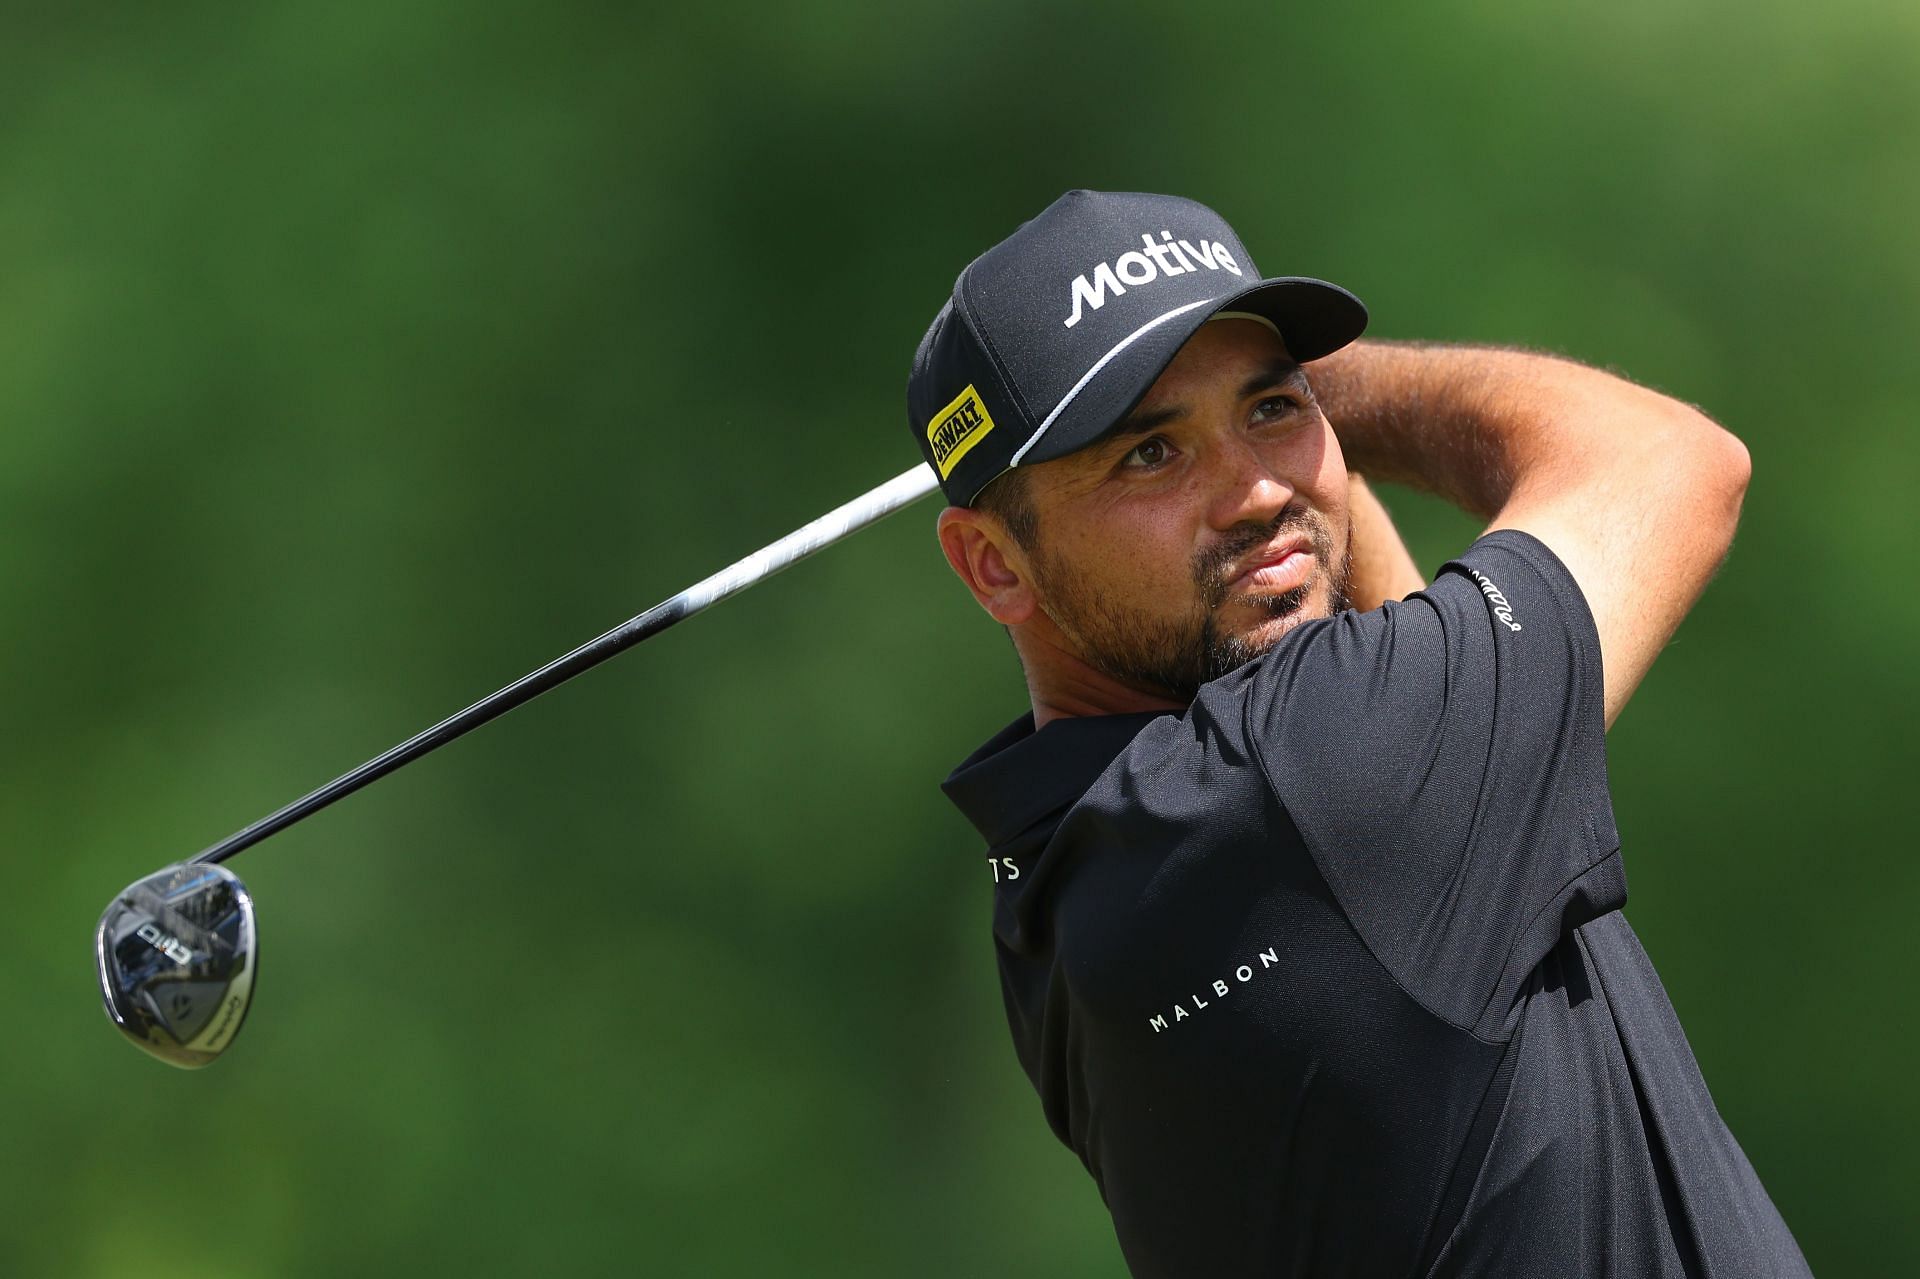 Jason Day has performed well at the PGA Championship